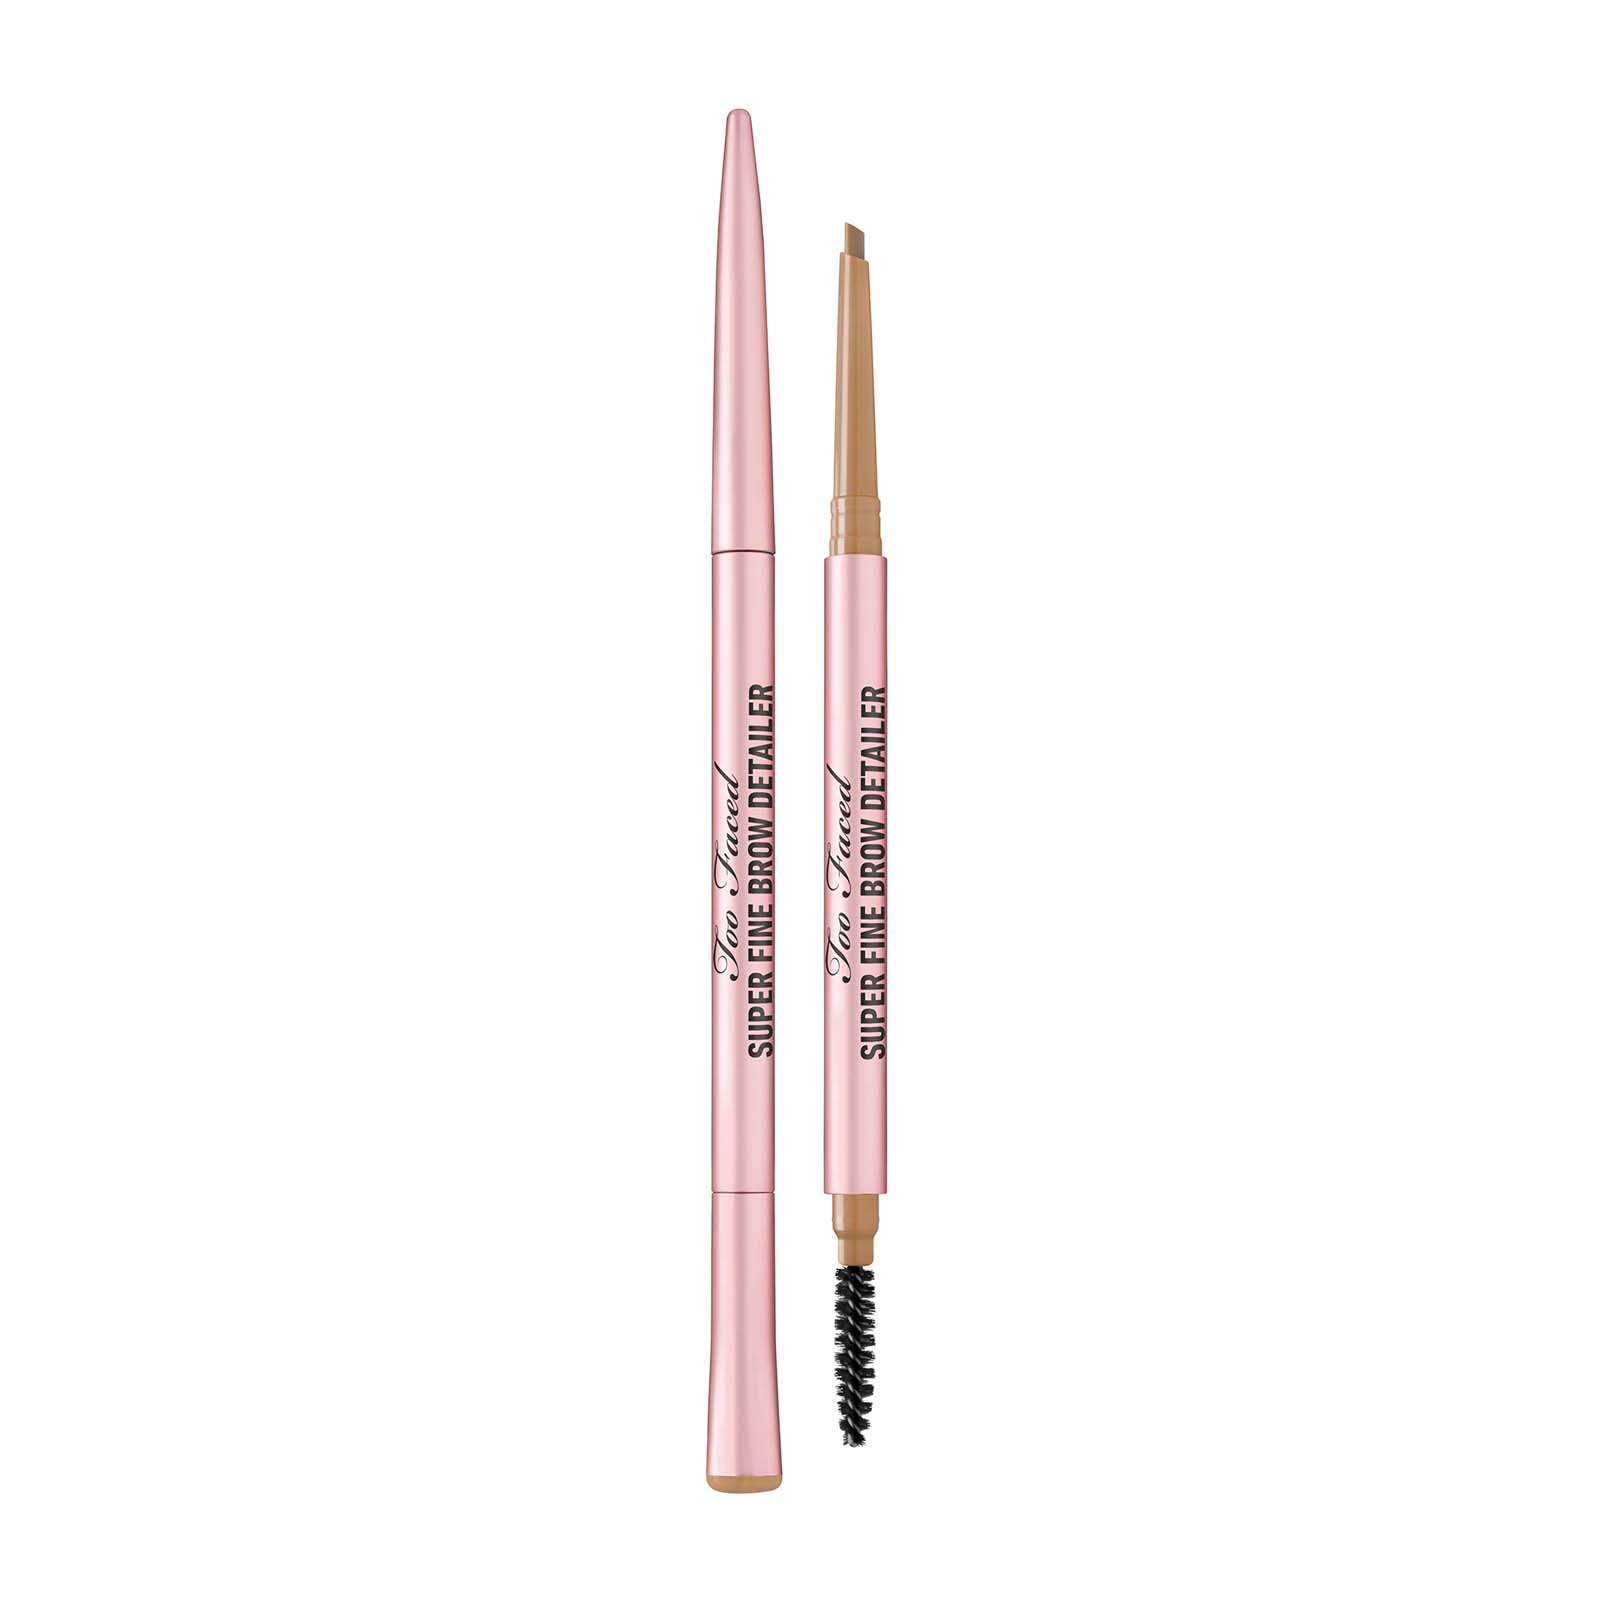 too faced superfine brow detailer ultra slim brow pencil 0.8g soft brown